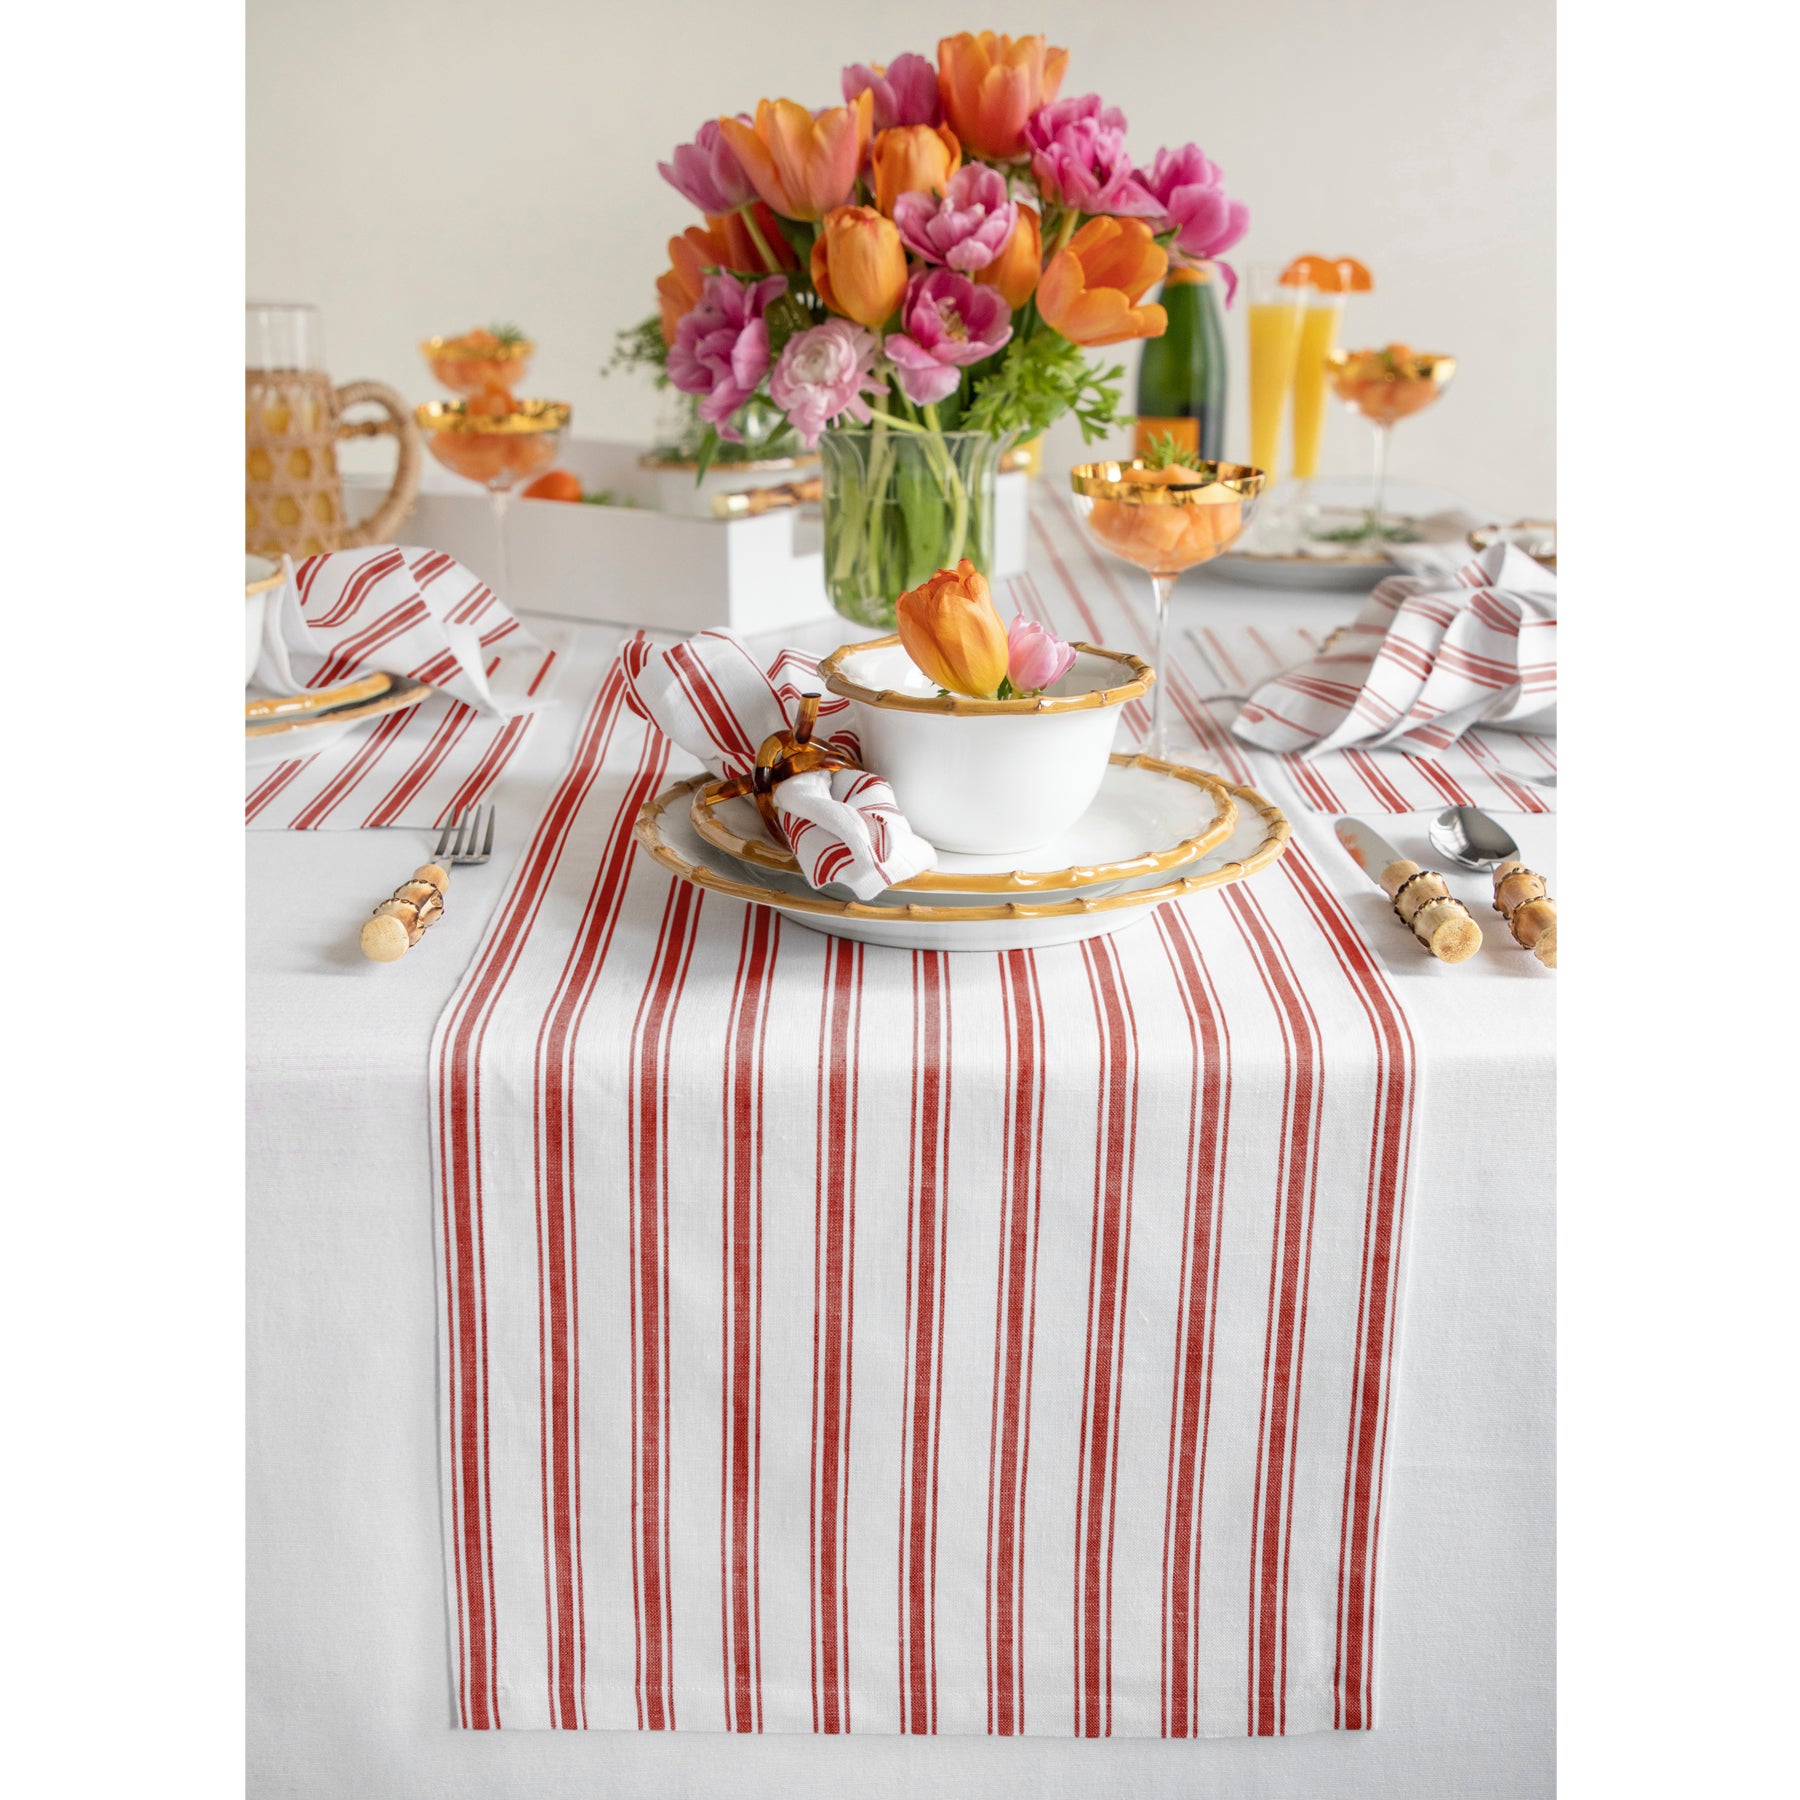 Capri Ticking Stripe - 100% Linen Placemats (Set of 4) Solino Home Color: Red and White